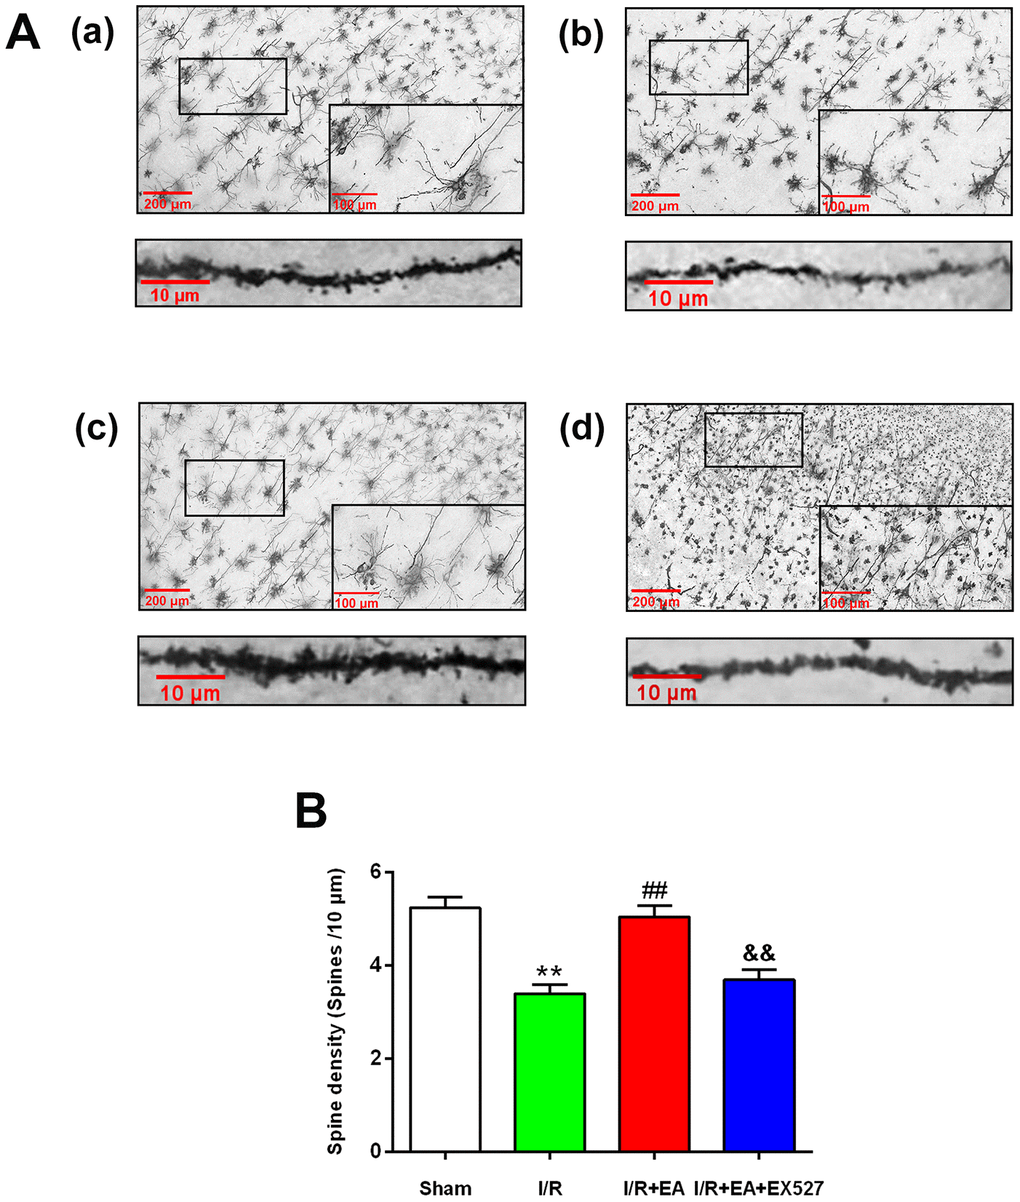 Effect of EA pretreatment on the dendritic spine density in cortical neurons in rats with CIR injury. (A) The Golgi-cox staining for the dendritic spine of neurons in the peri-ischemic cortex in the sham group (a), the I/R group (b), the I/R + EA group (c), and the I/R + EA + EX527 group (d) (100×). High magnification images are shown in the small windows (400×). The graphs below (a), (b), (c), and (d) were enlarged with 1000×, respectively. Scale bar, 100×: 200 μm, 400×: 100 μm; 1000×: 10 μm. (B) The dendritic spine density in cortical neurons. Data were presented as the mean ± SEM (n=3). **Pvs. sham group. ##Pvs. I/R group; &&Pvs. I/R + EA group.